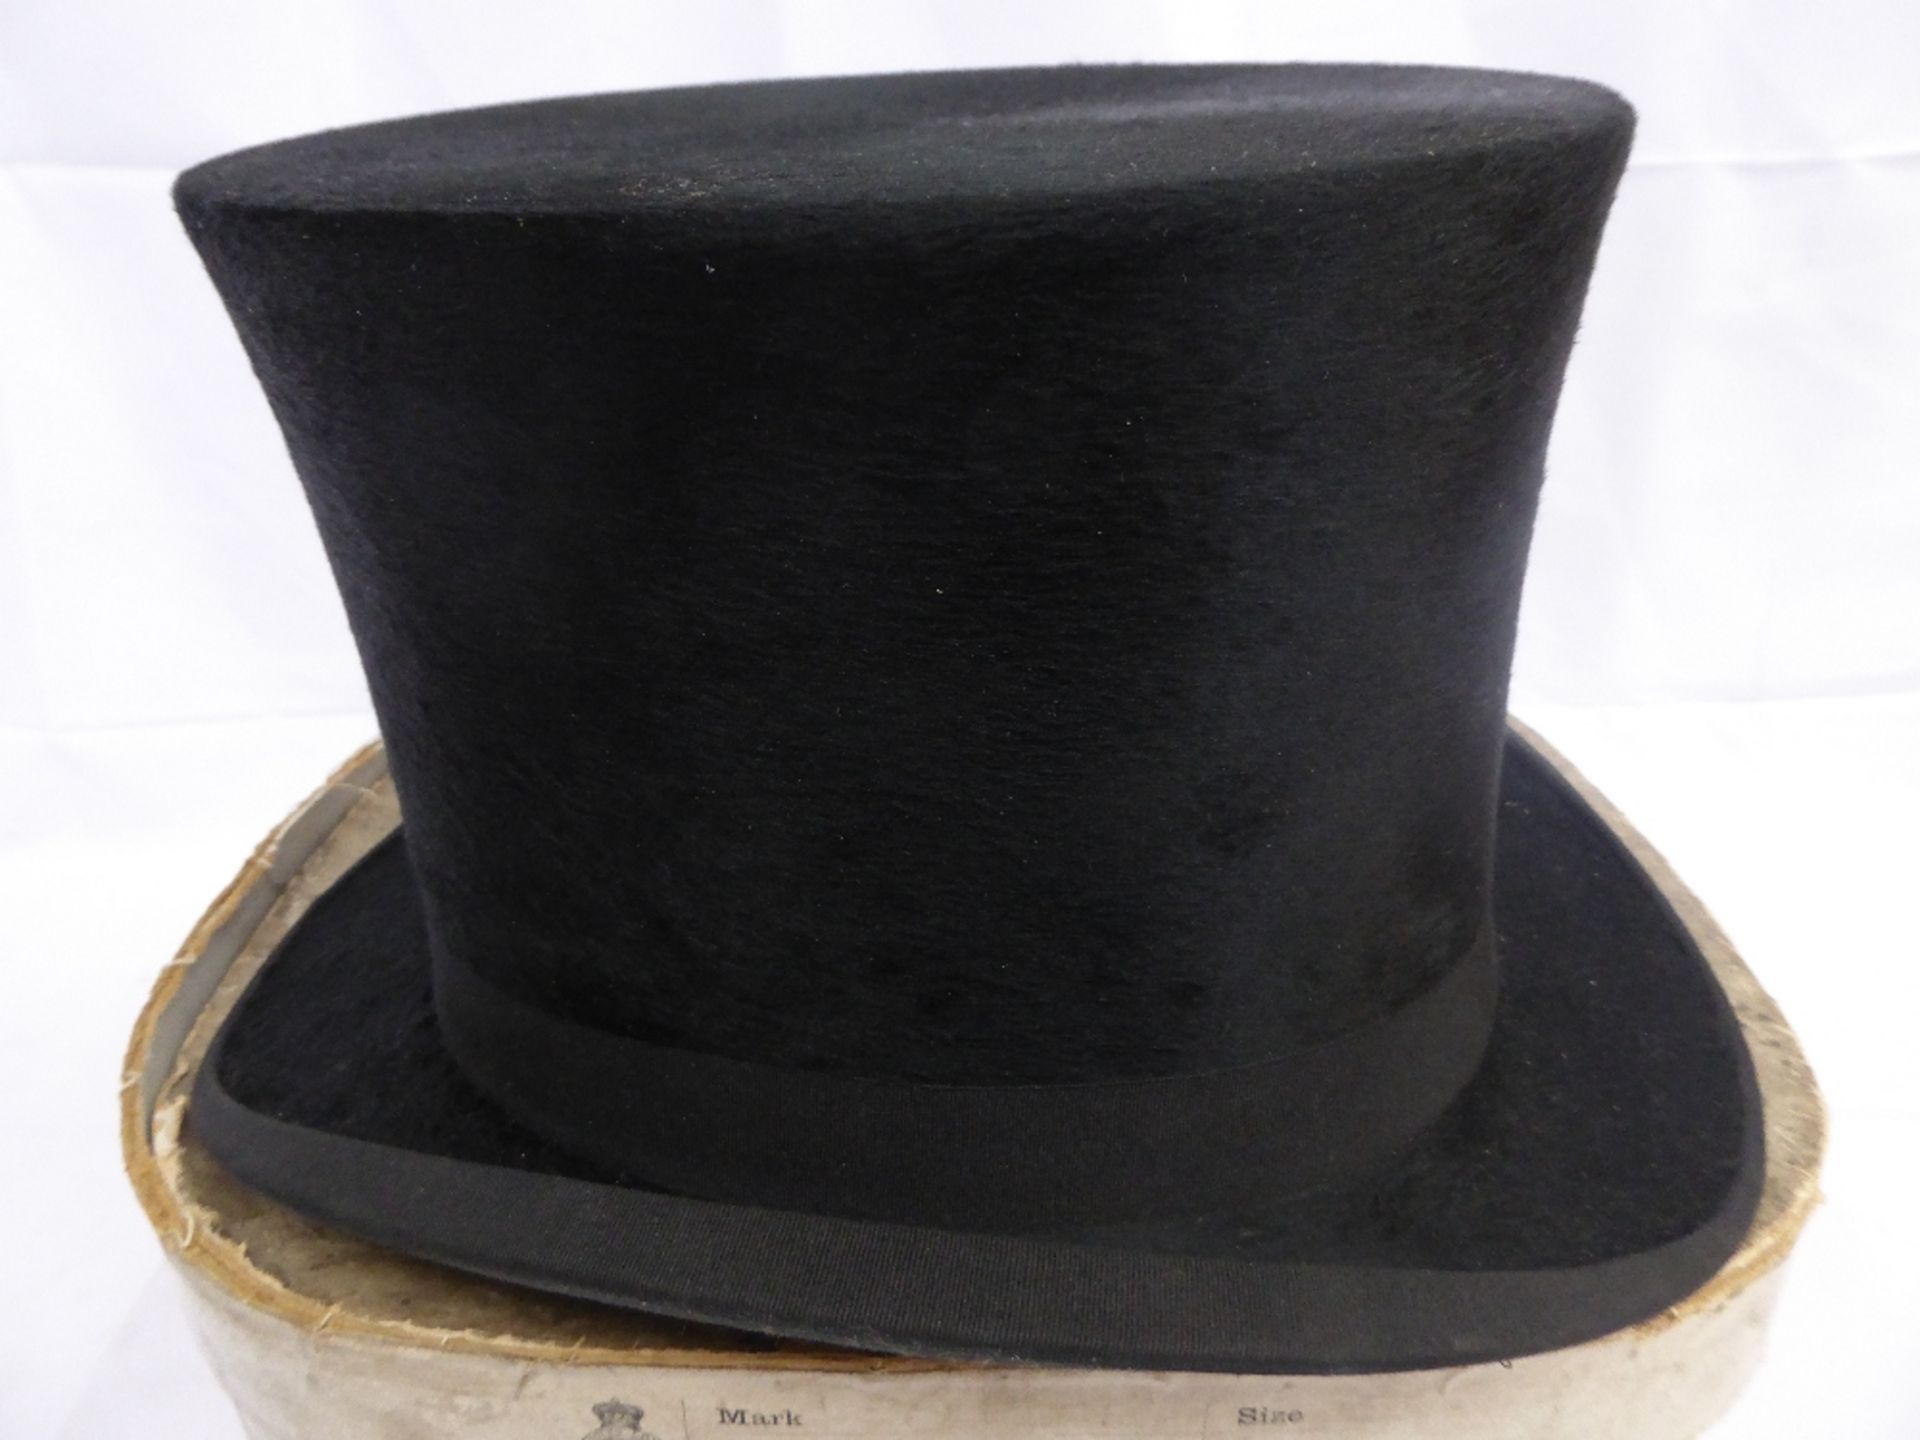 Gent's black silk top hat by Christy's of London, internal measurements 20 x 16 cms - Image 3 of 4